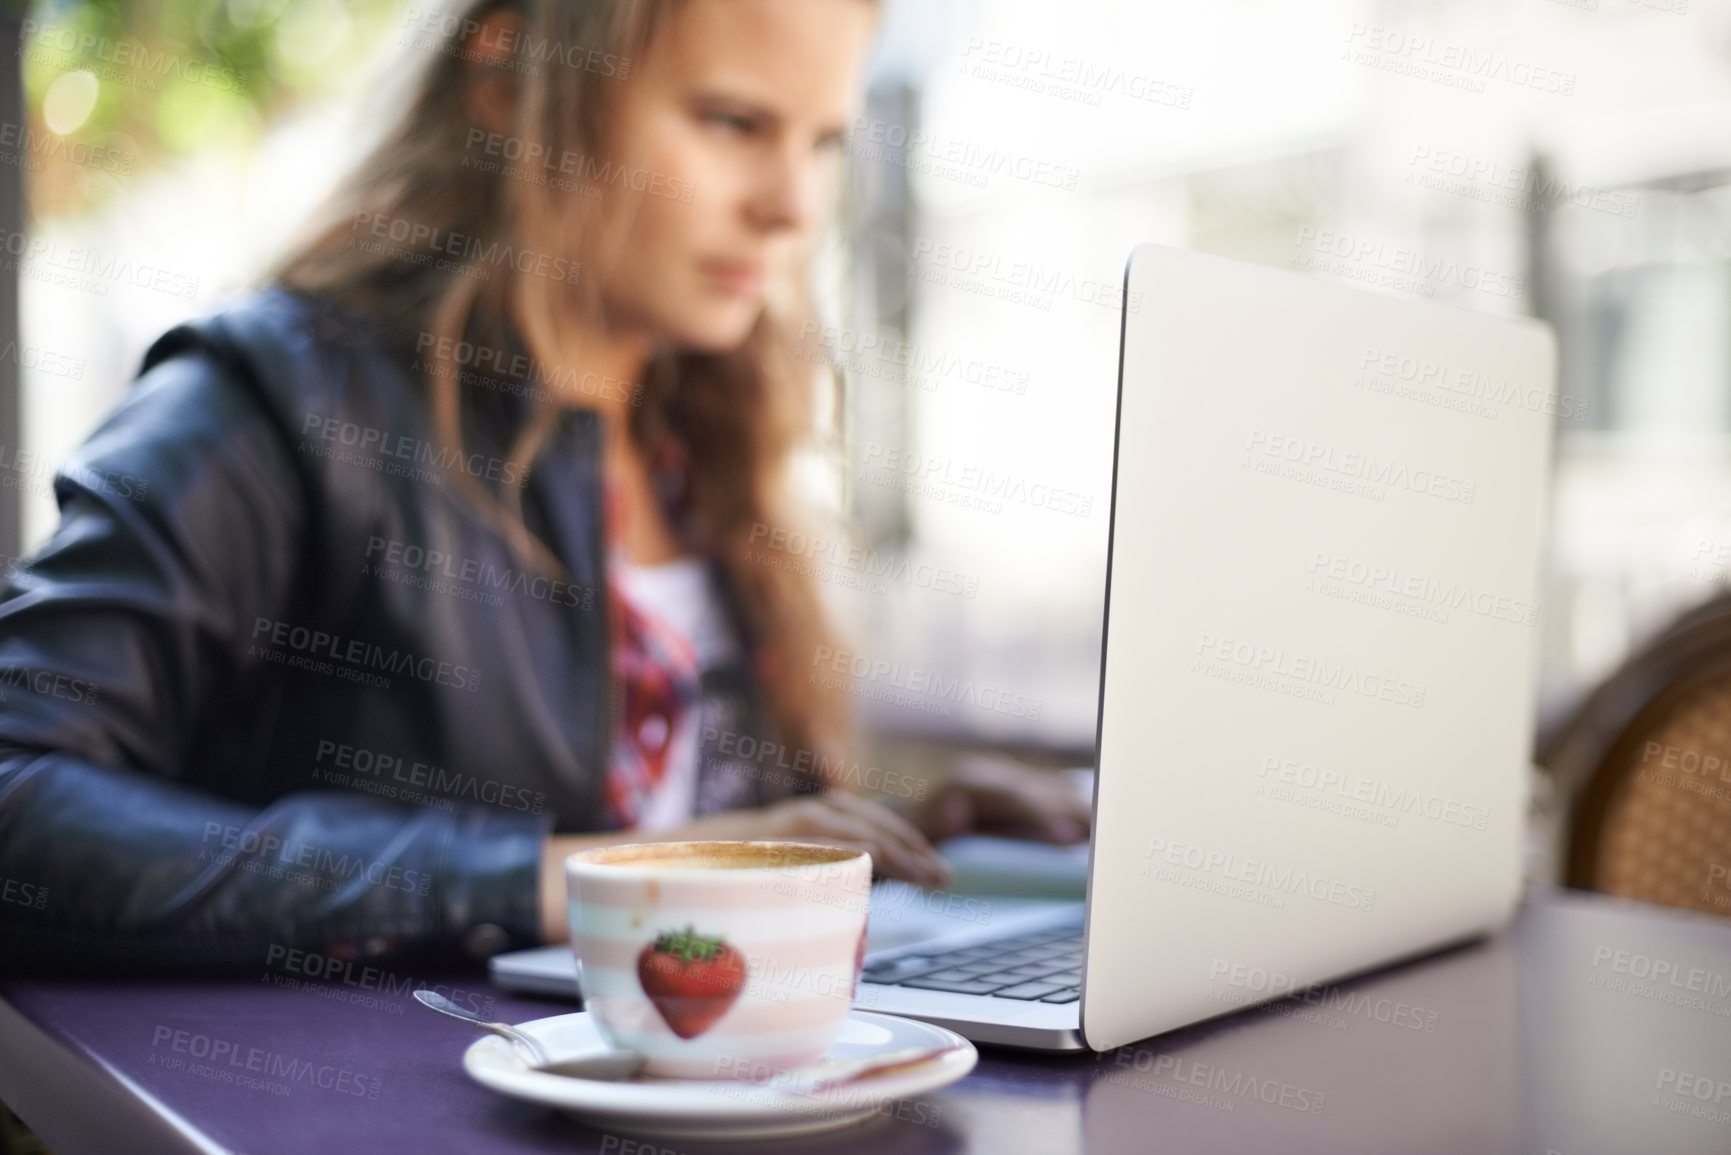 Buy stock photo College student, working and laptop outdoor at coffee shop, cafe or restaurant with espresso, latte or cup. Girl, studying and drink a green tea or beverage in summer, morning or bistro on campus